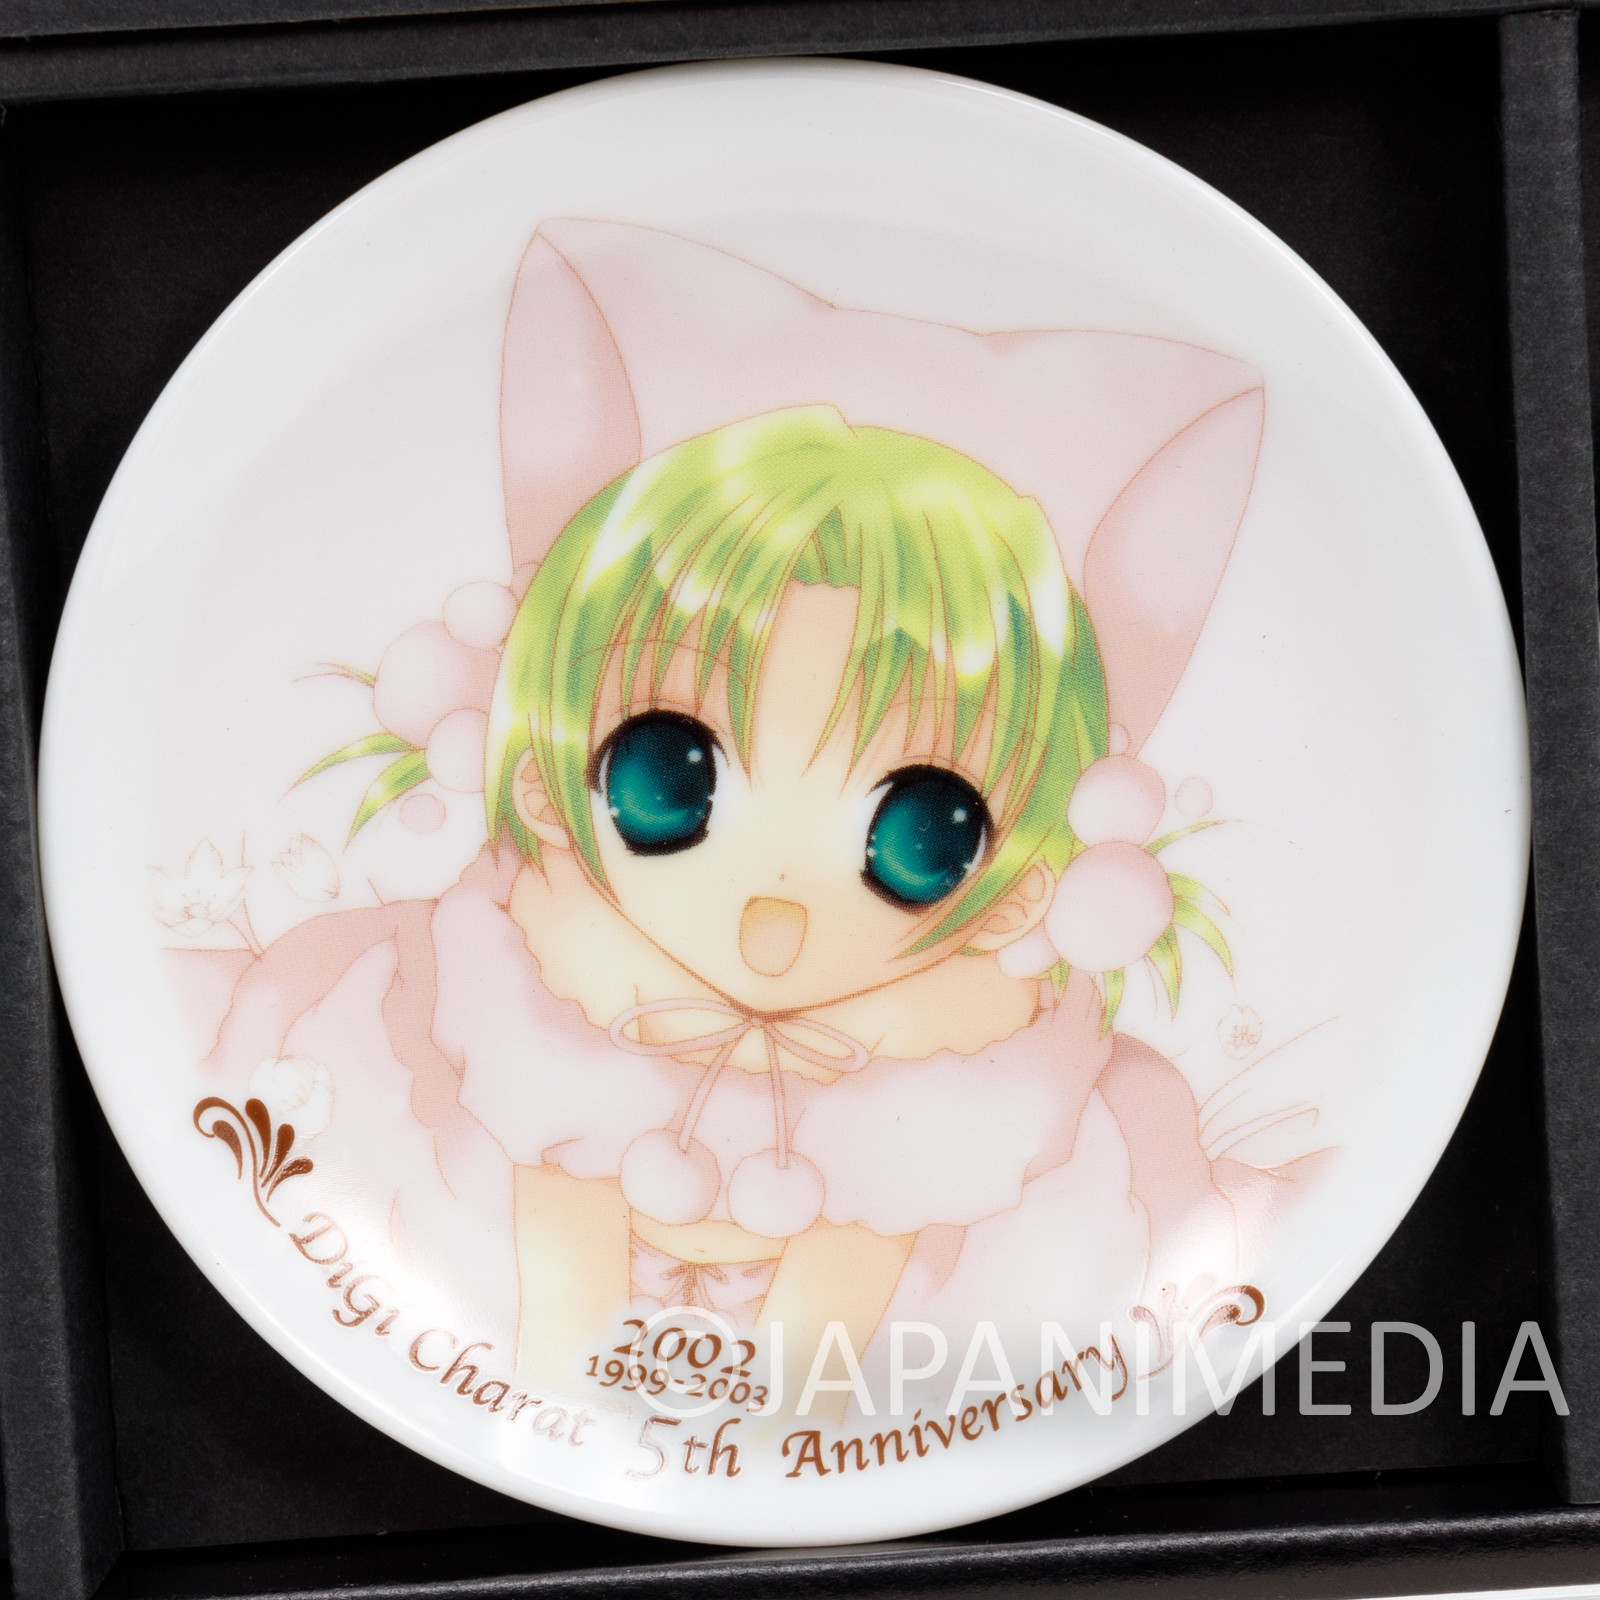 Di Gi Charat Small Plate Set 5ht Anniversary Limited JAPAN ANIME GAMERS